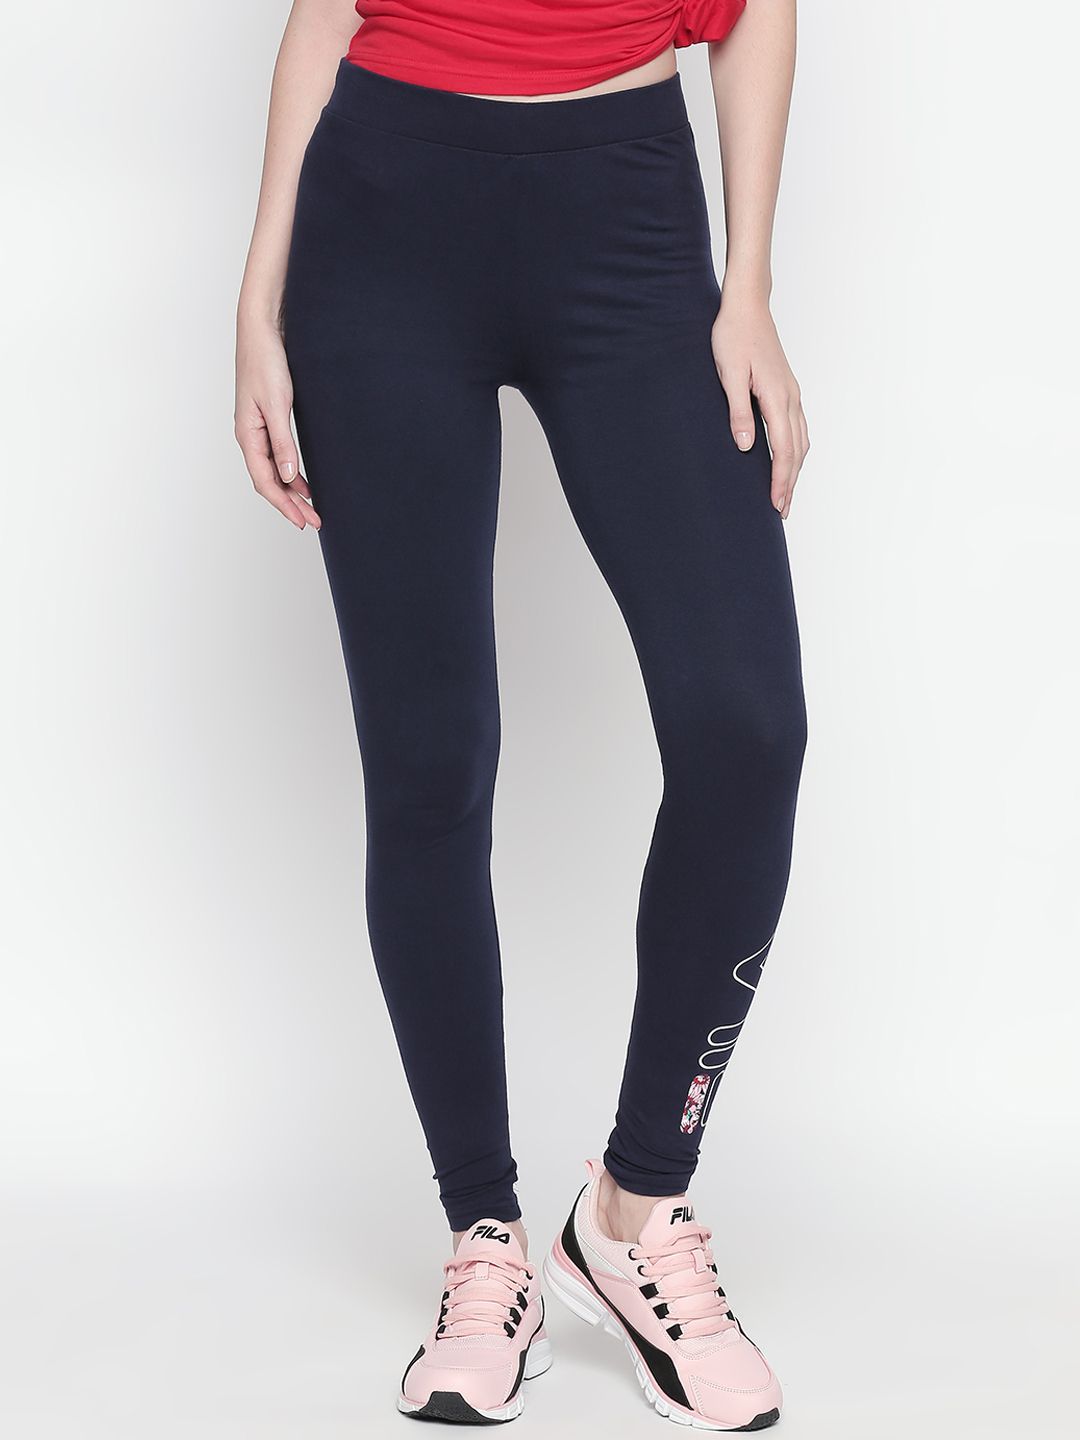 FILA Women Navy Blue Slim Fit Printed Tights Price in India